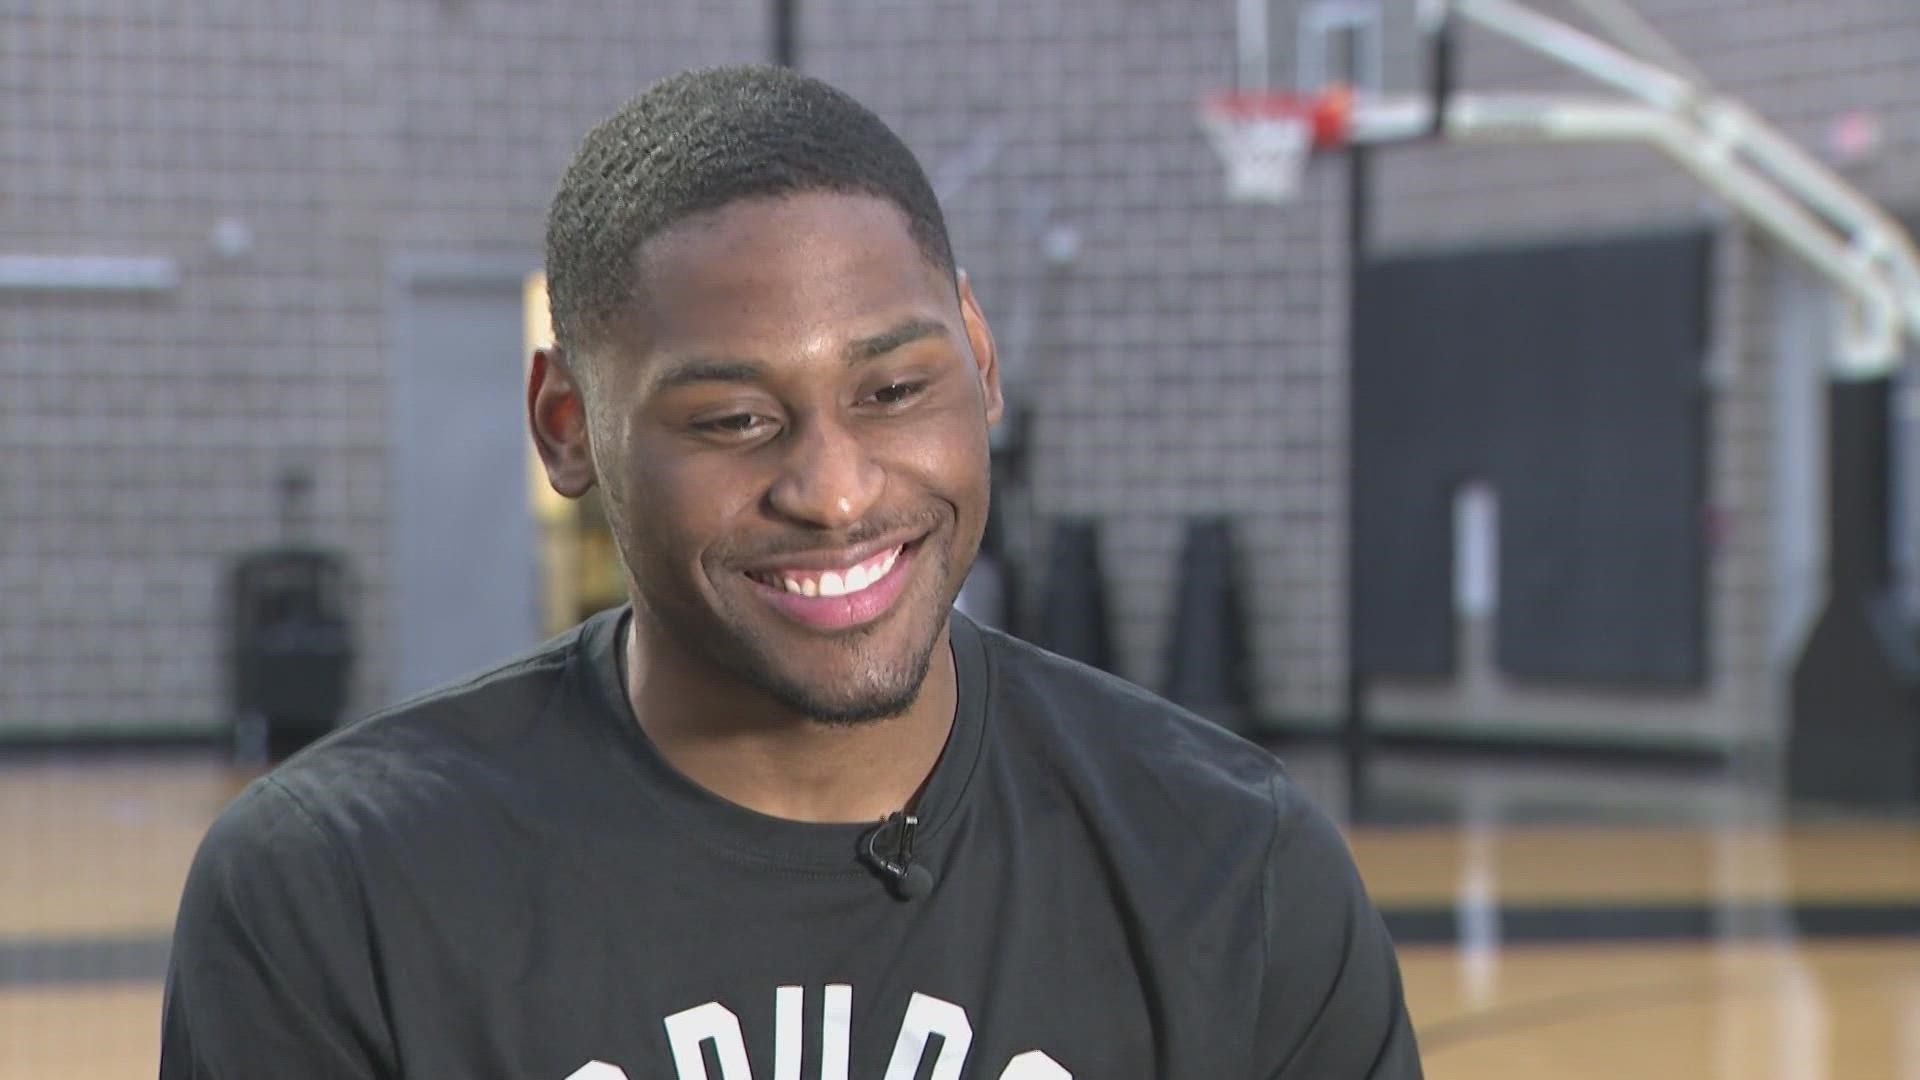 After being selected 20th overall in last month’s NBA Draft, Branham continues to make a seamless transition to the Alamo City with an infectious smile.